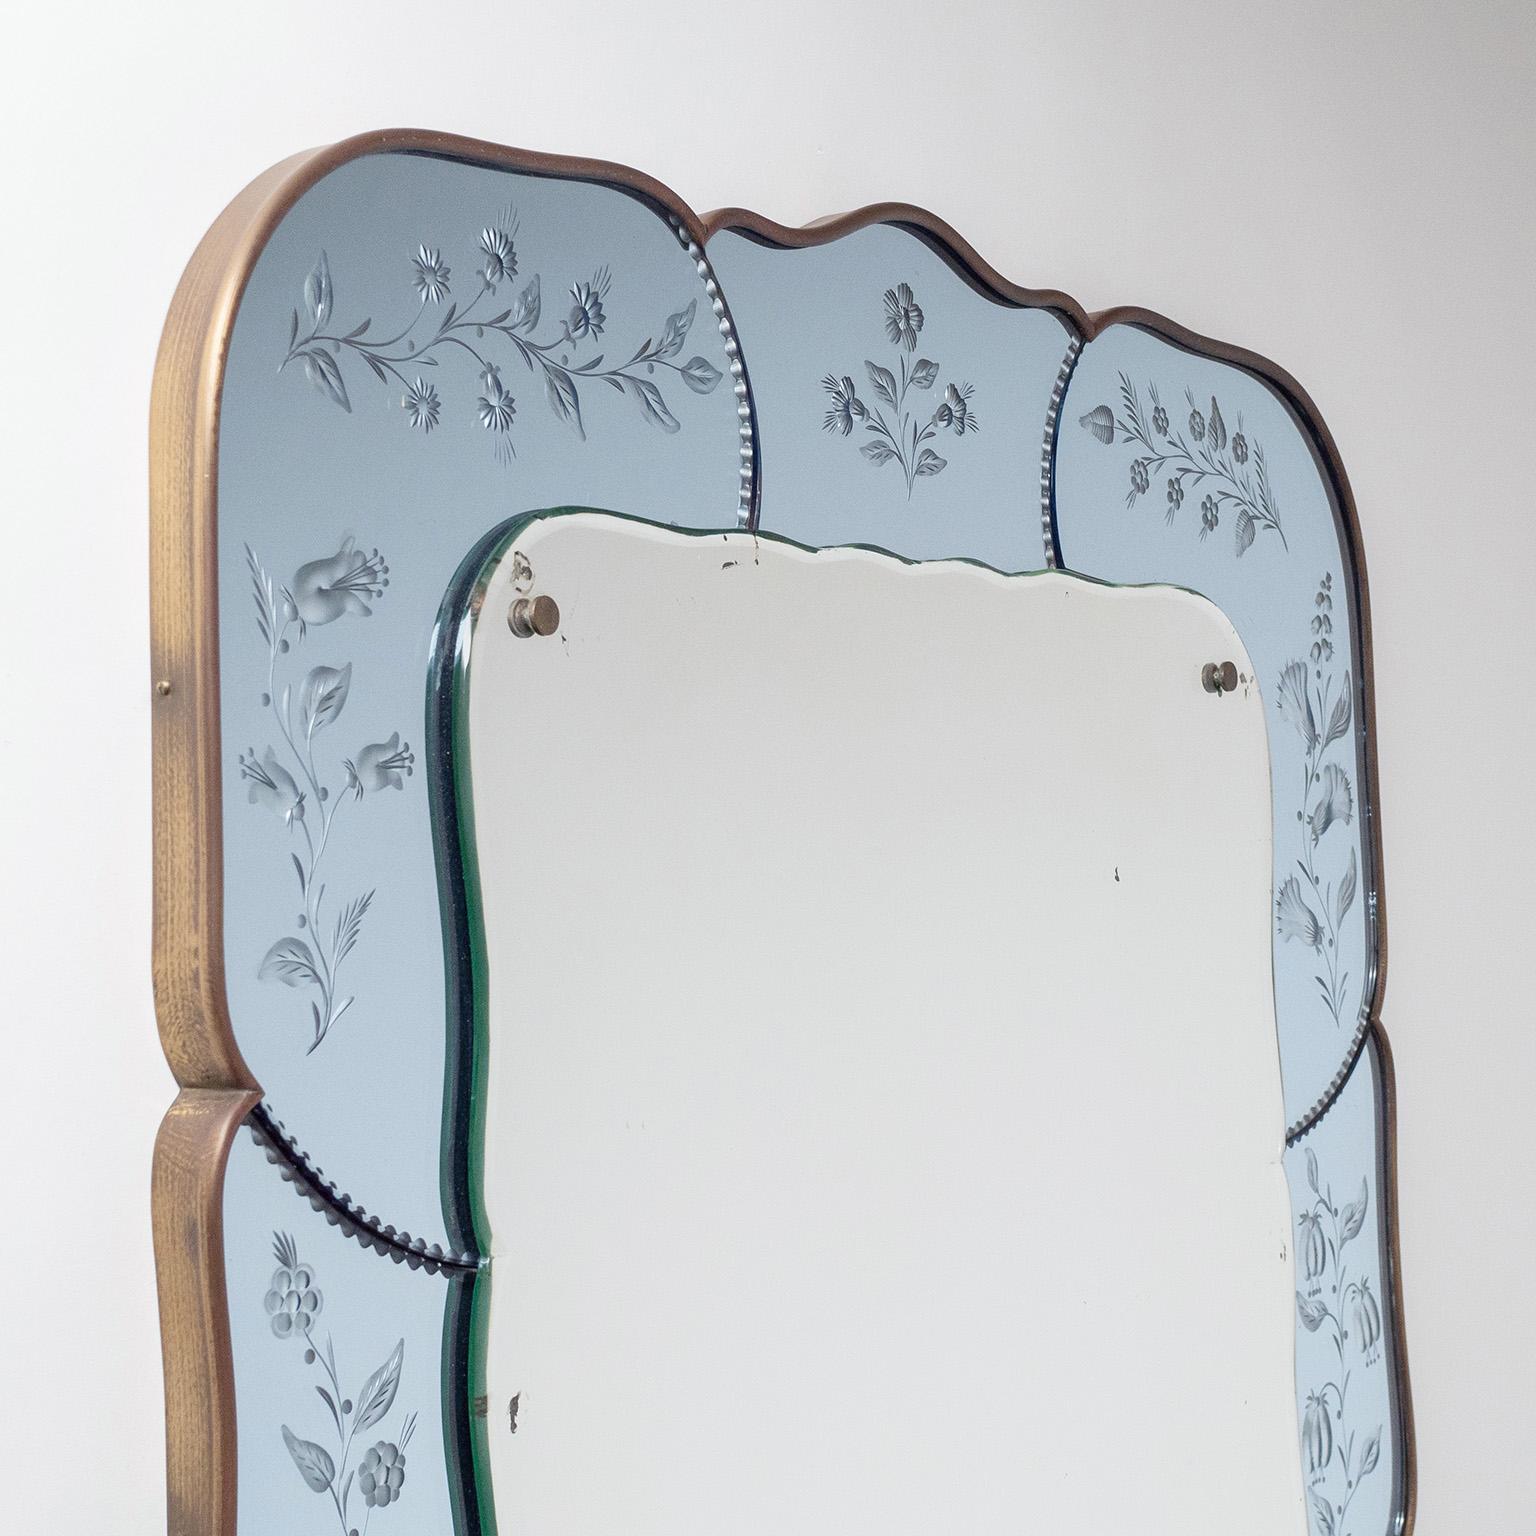 Rare Italian dual-color cut glass mirror, attributed to Luigi Brusotti from the 1940s. Very high-quality craftsmanship, with superbly detailed floral decorations in the blue mirror border (each pane individually styled), and a continuous brass frame